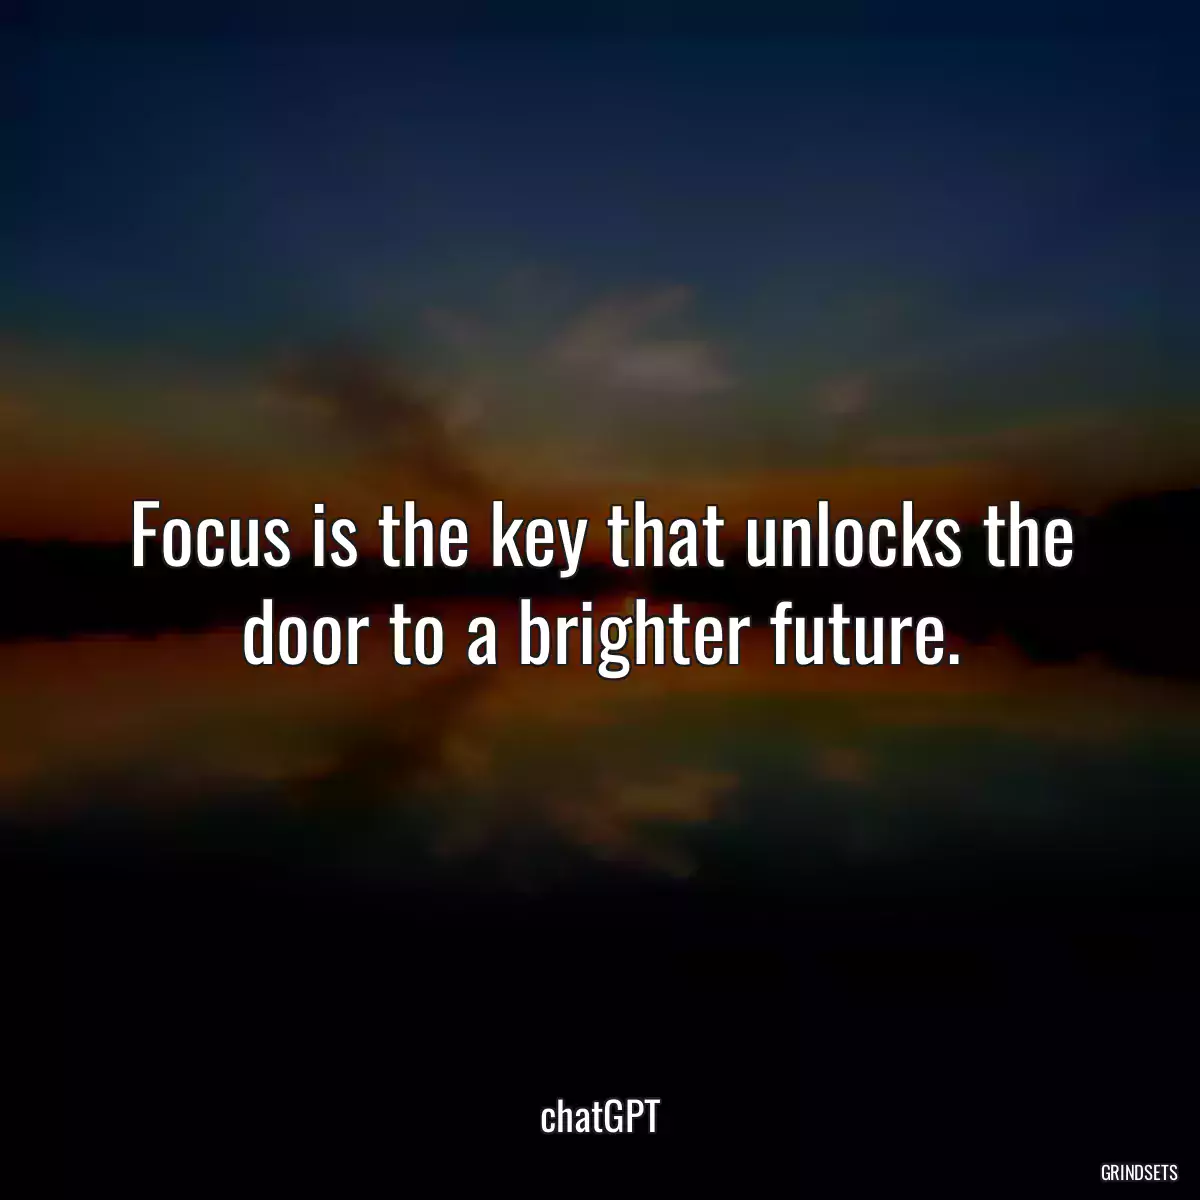 Focus is the key that unlocks the door to a brighter future.